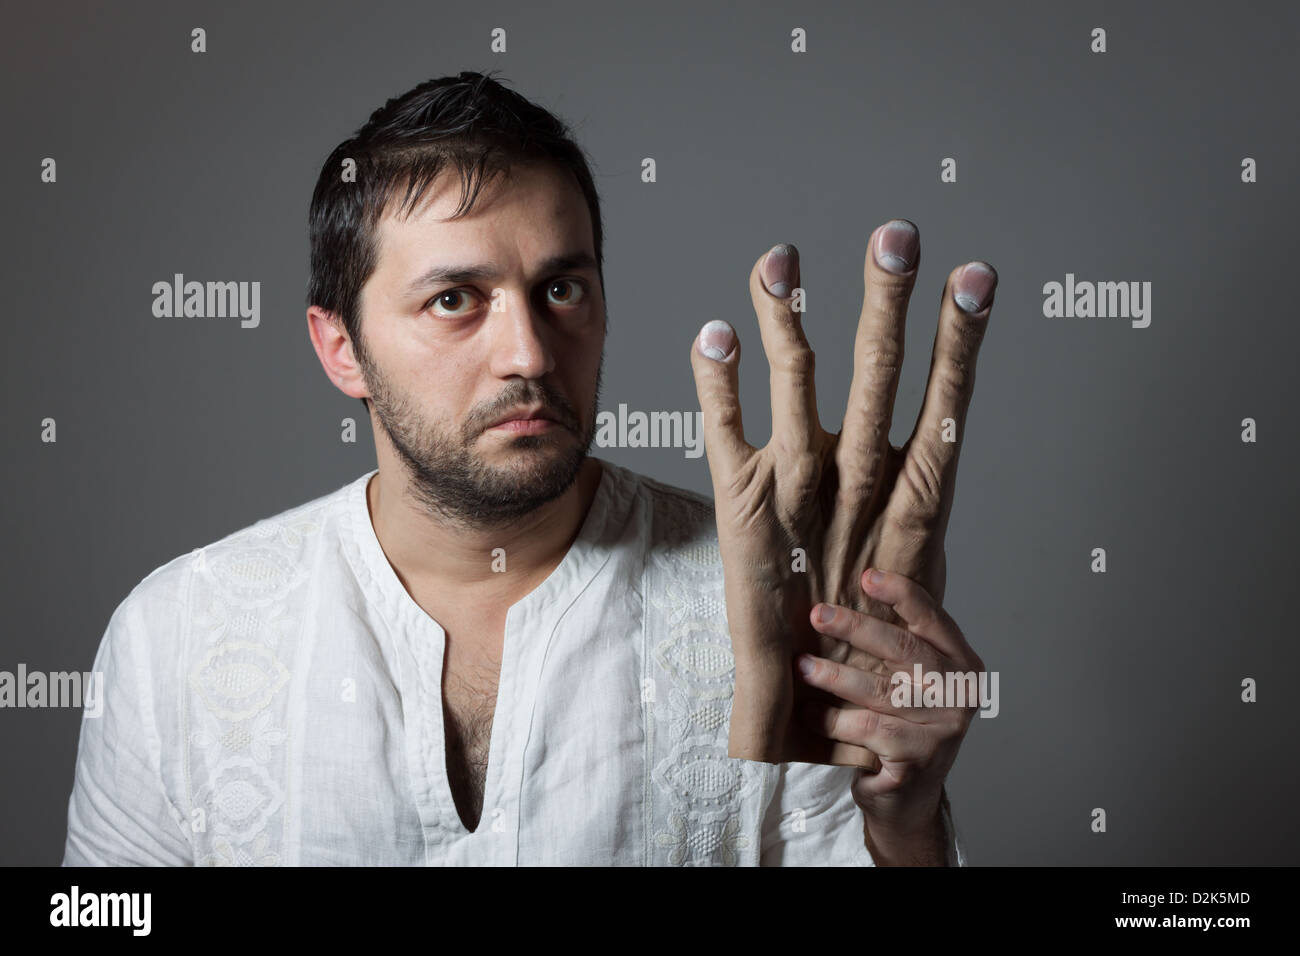 Young bearded man with interrogative expression on his face holding a huge mock hand Stock Photo